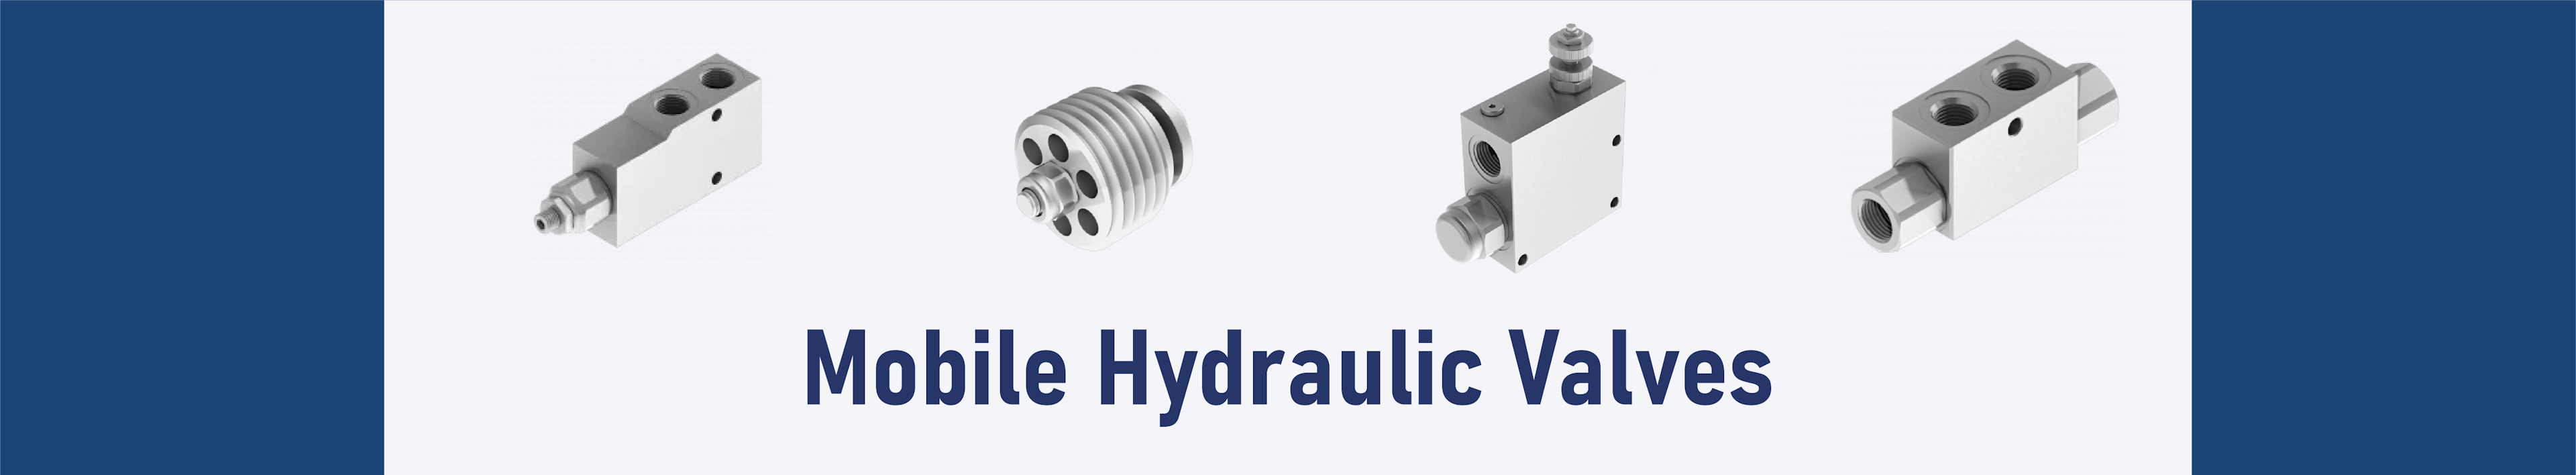 mobile hydraulic valves